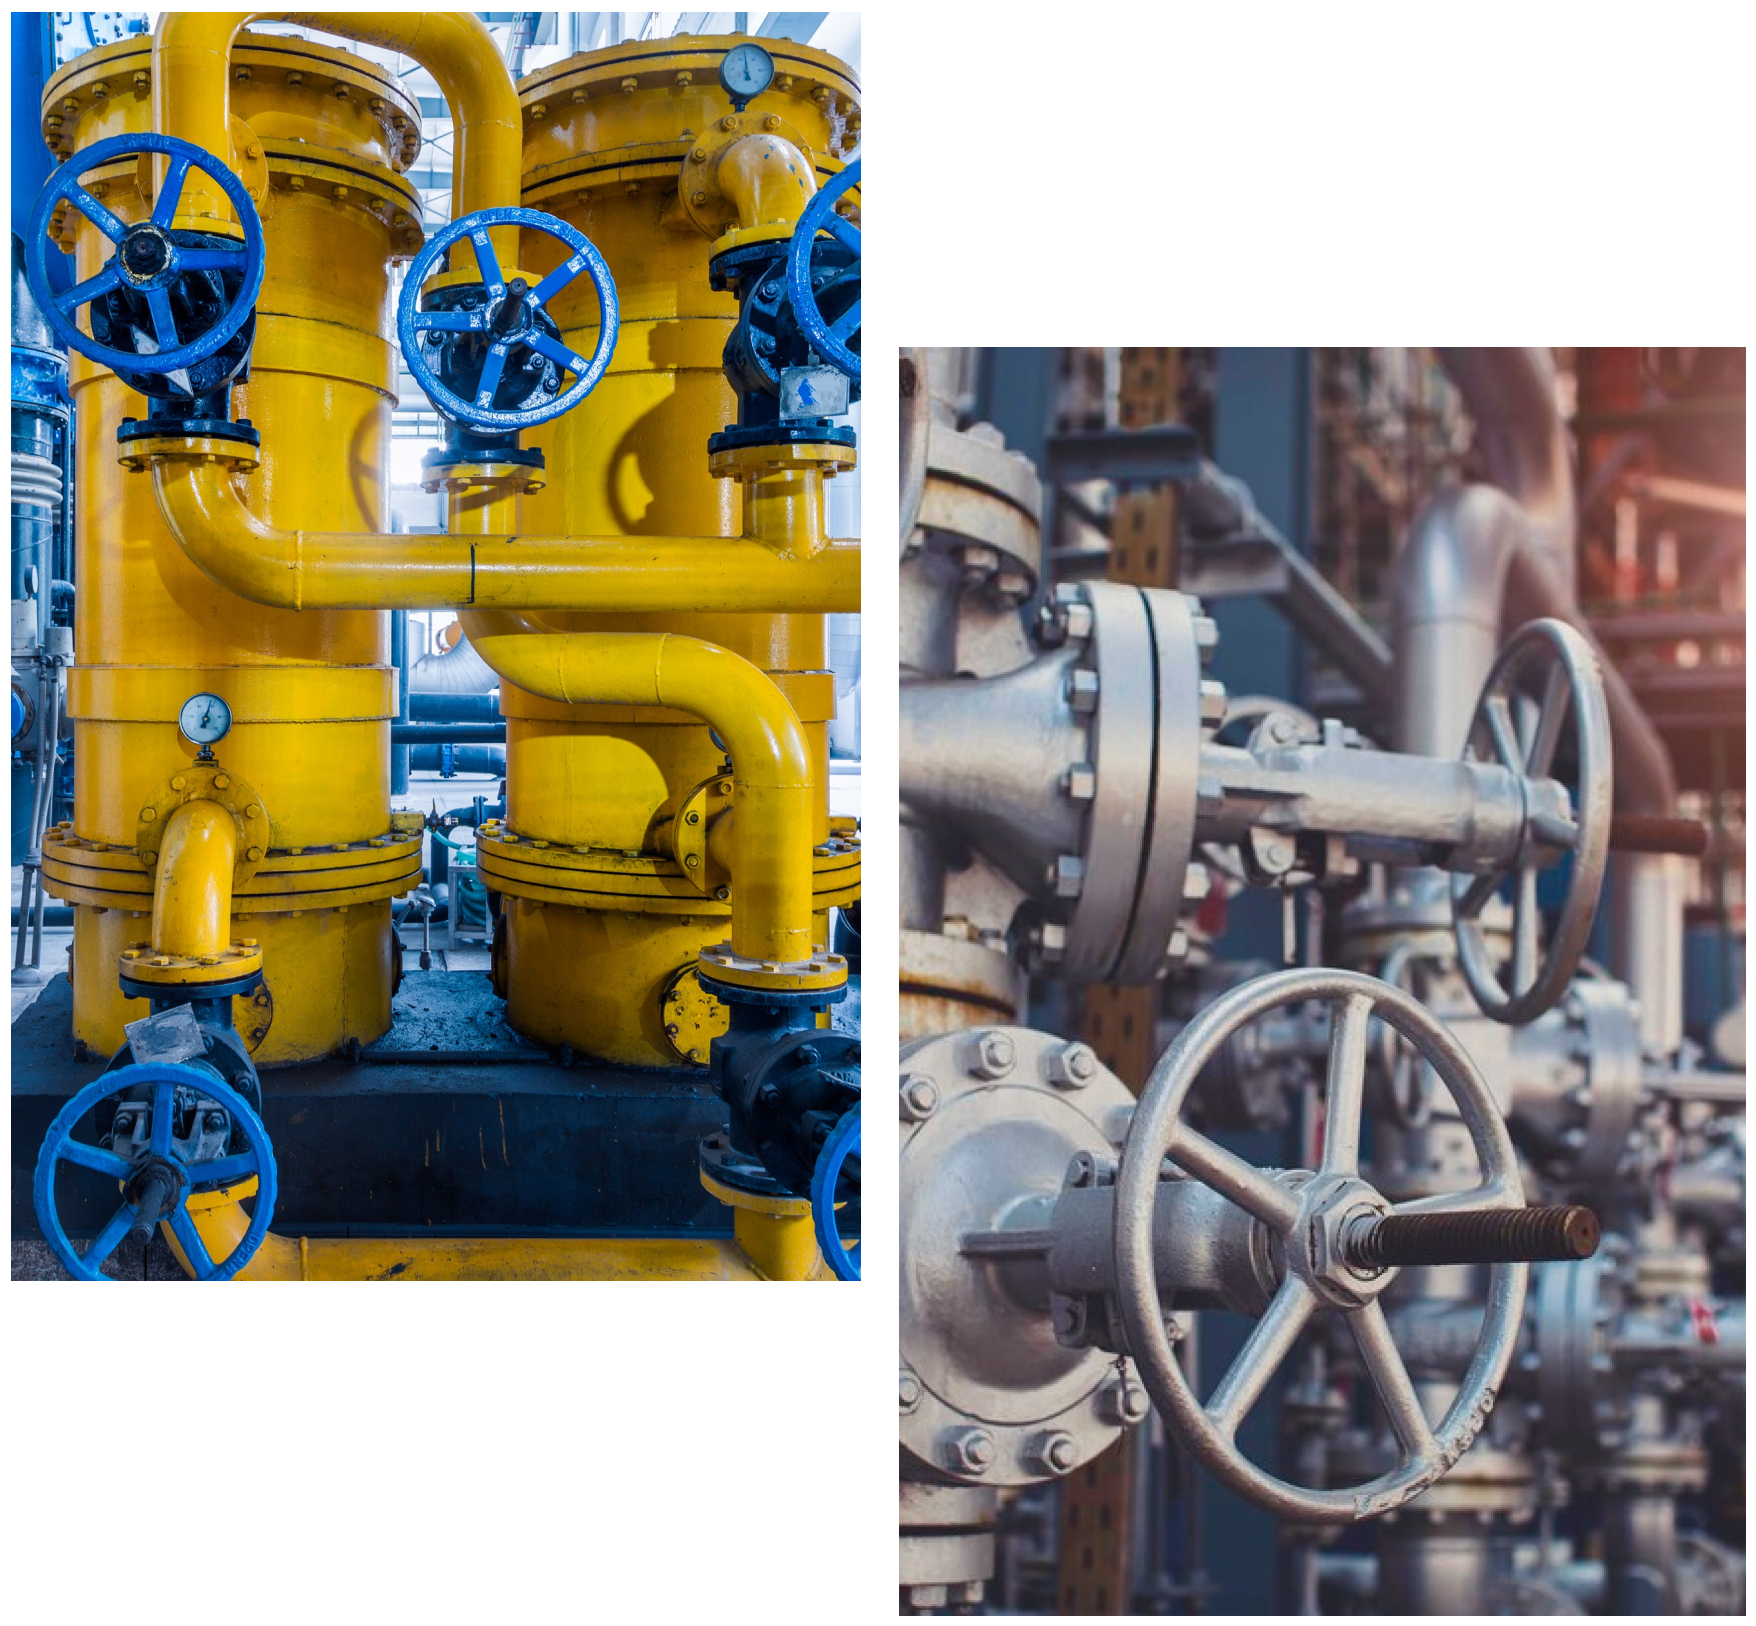 A collage image of industrial valves from AlterValve in industry premises.